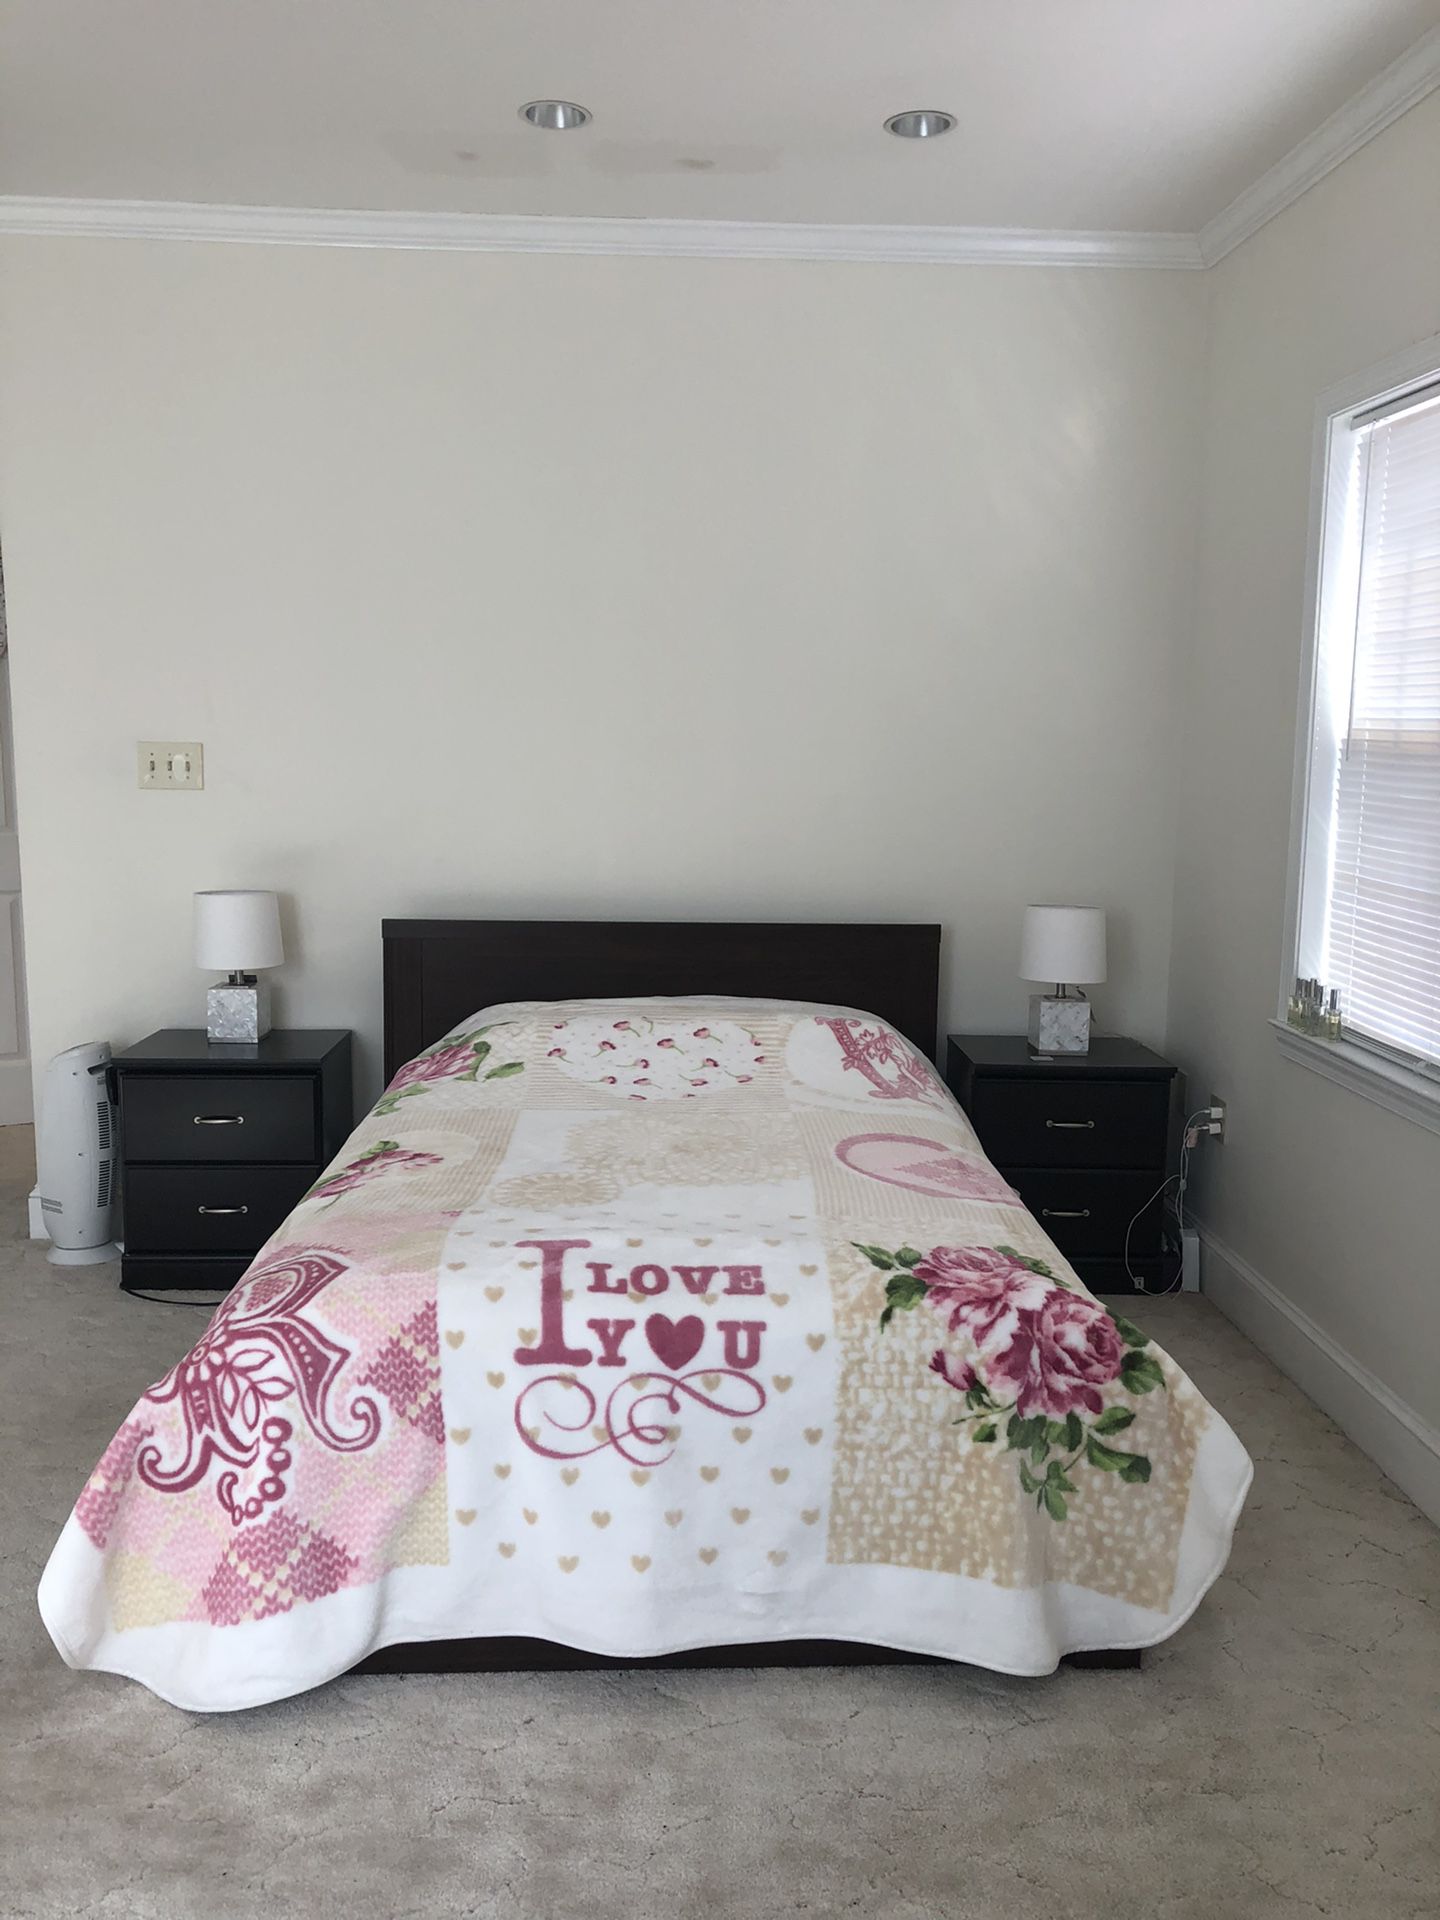 Ikea Queen Size Bed (Frame, Matress and two nightstands)